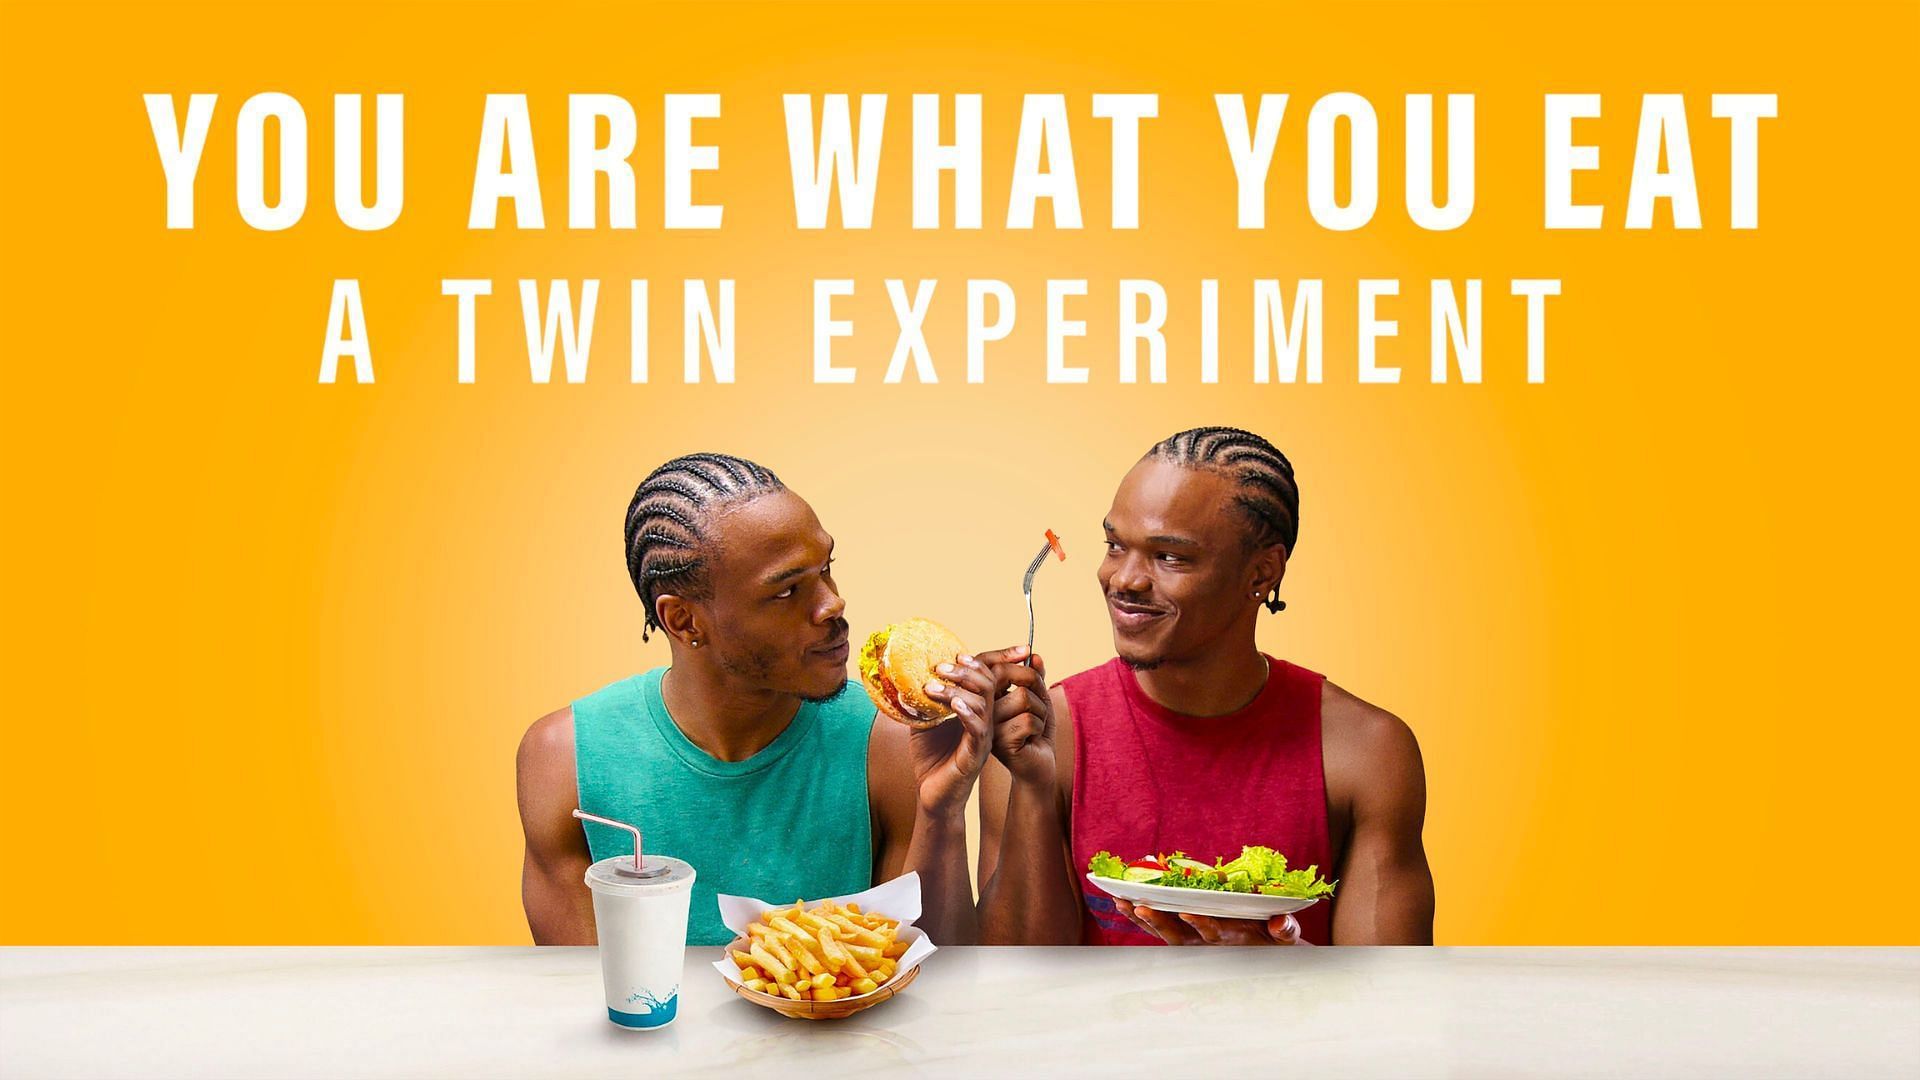 John and Jevon Whittington have somewhat become the face of You Are What You Eat (Image via Netflix)